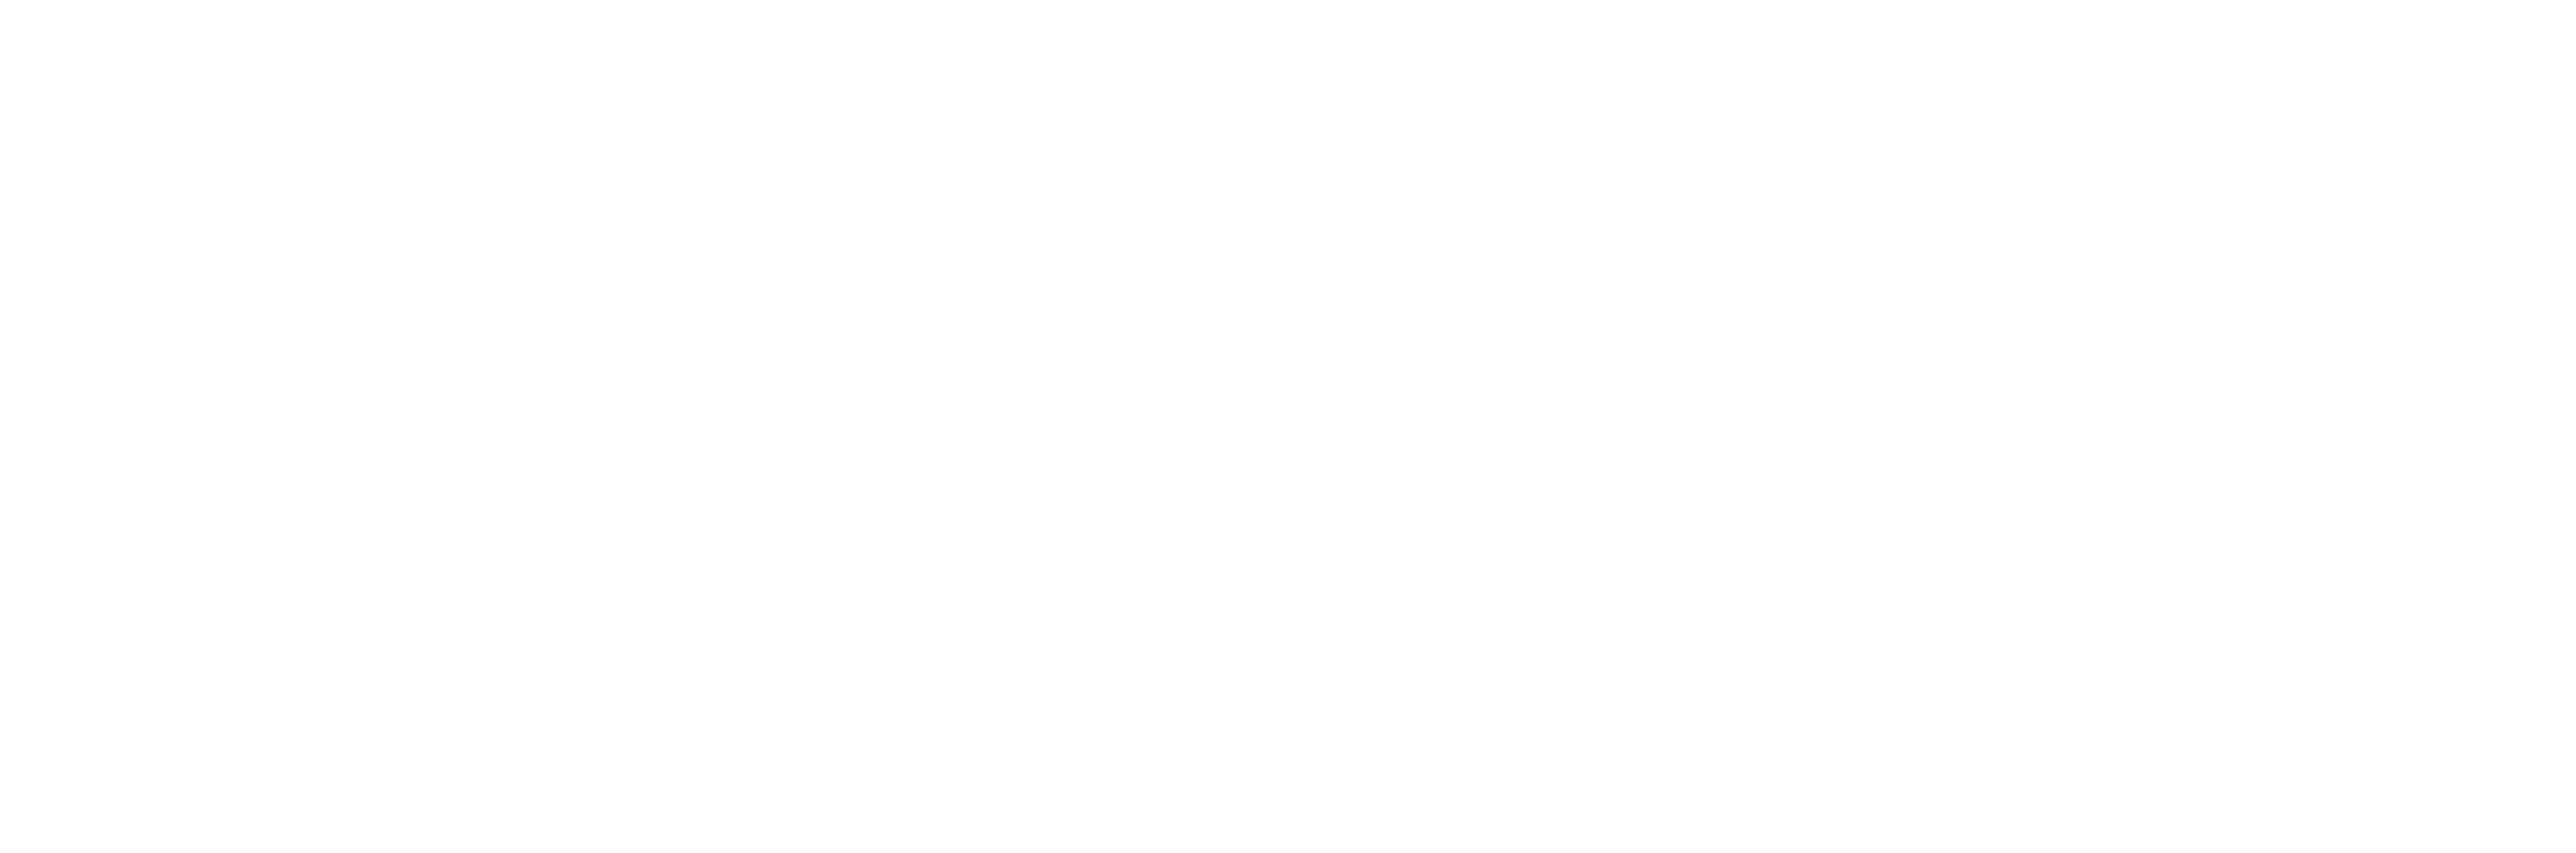 The Moaning of Life logo